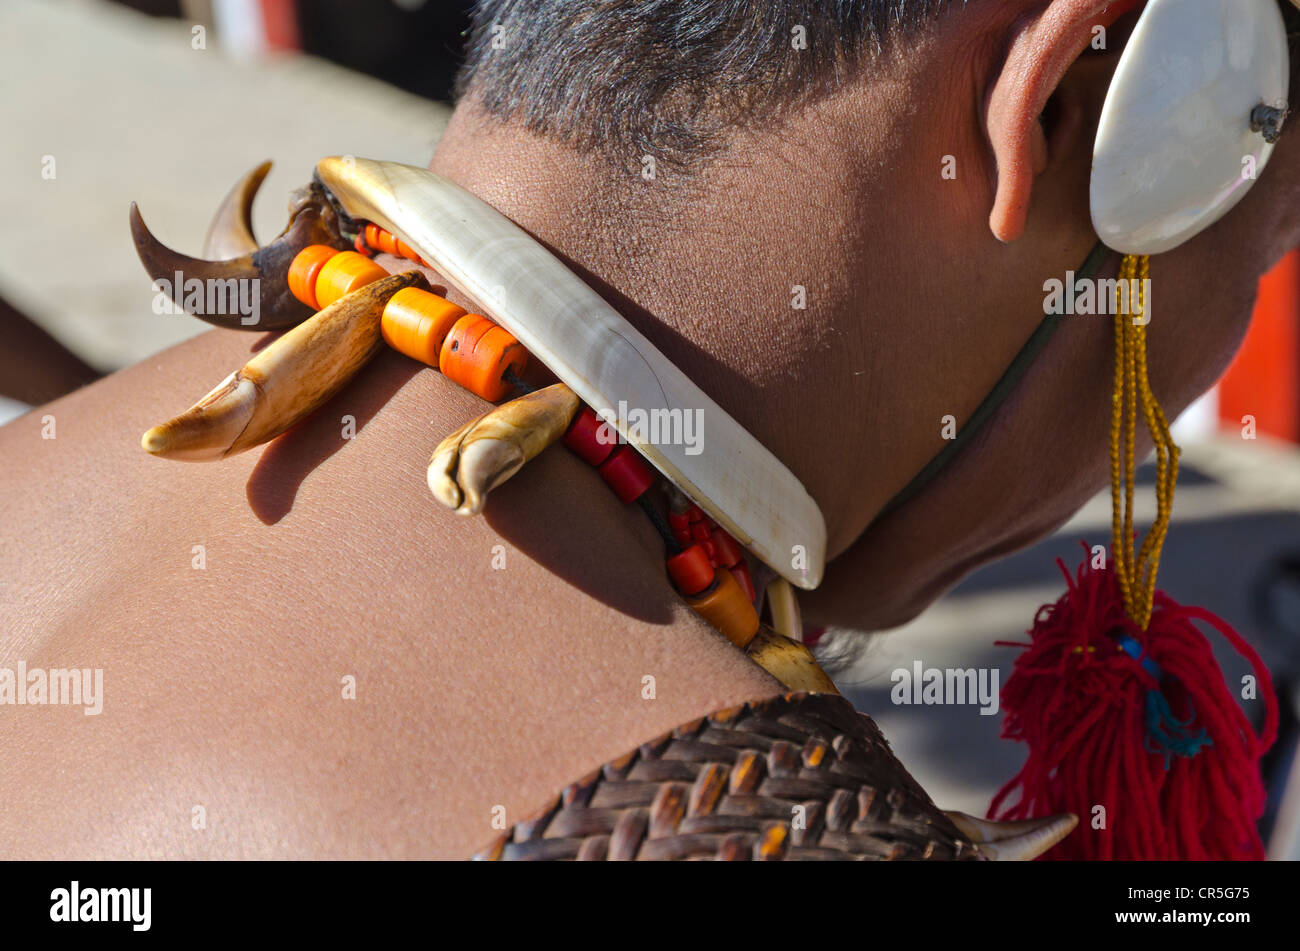 Man in tribal dress at the annual Hornbill Festival in Kohima, India, Asia Stock Photo